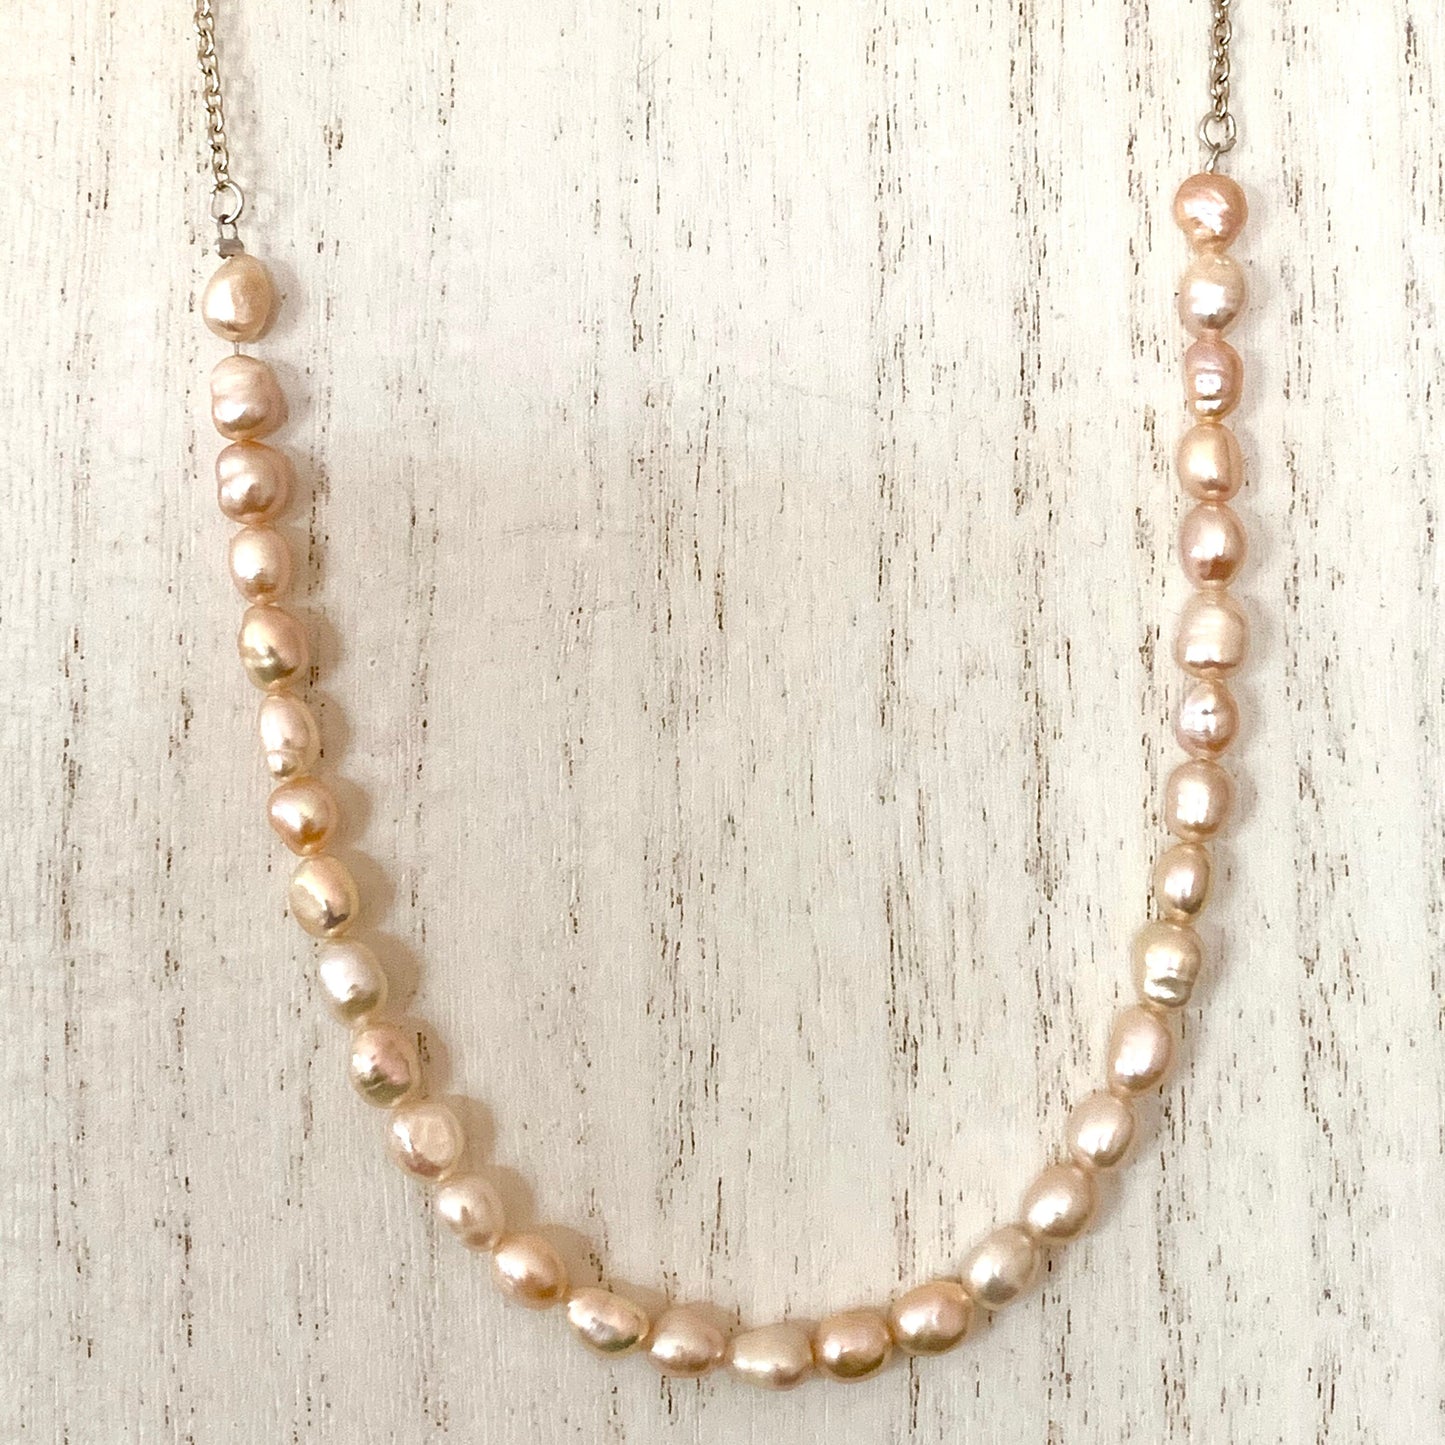 Pink Freshwater Pearl demi-strand,  attached to  from silver chain.